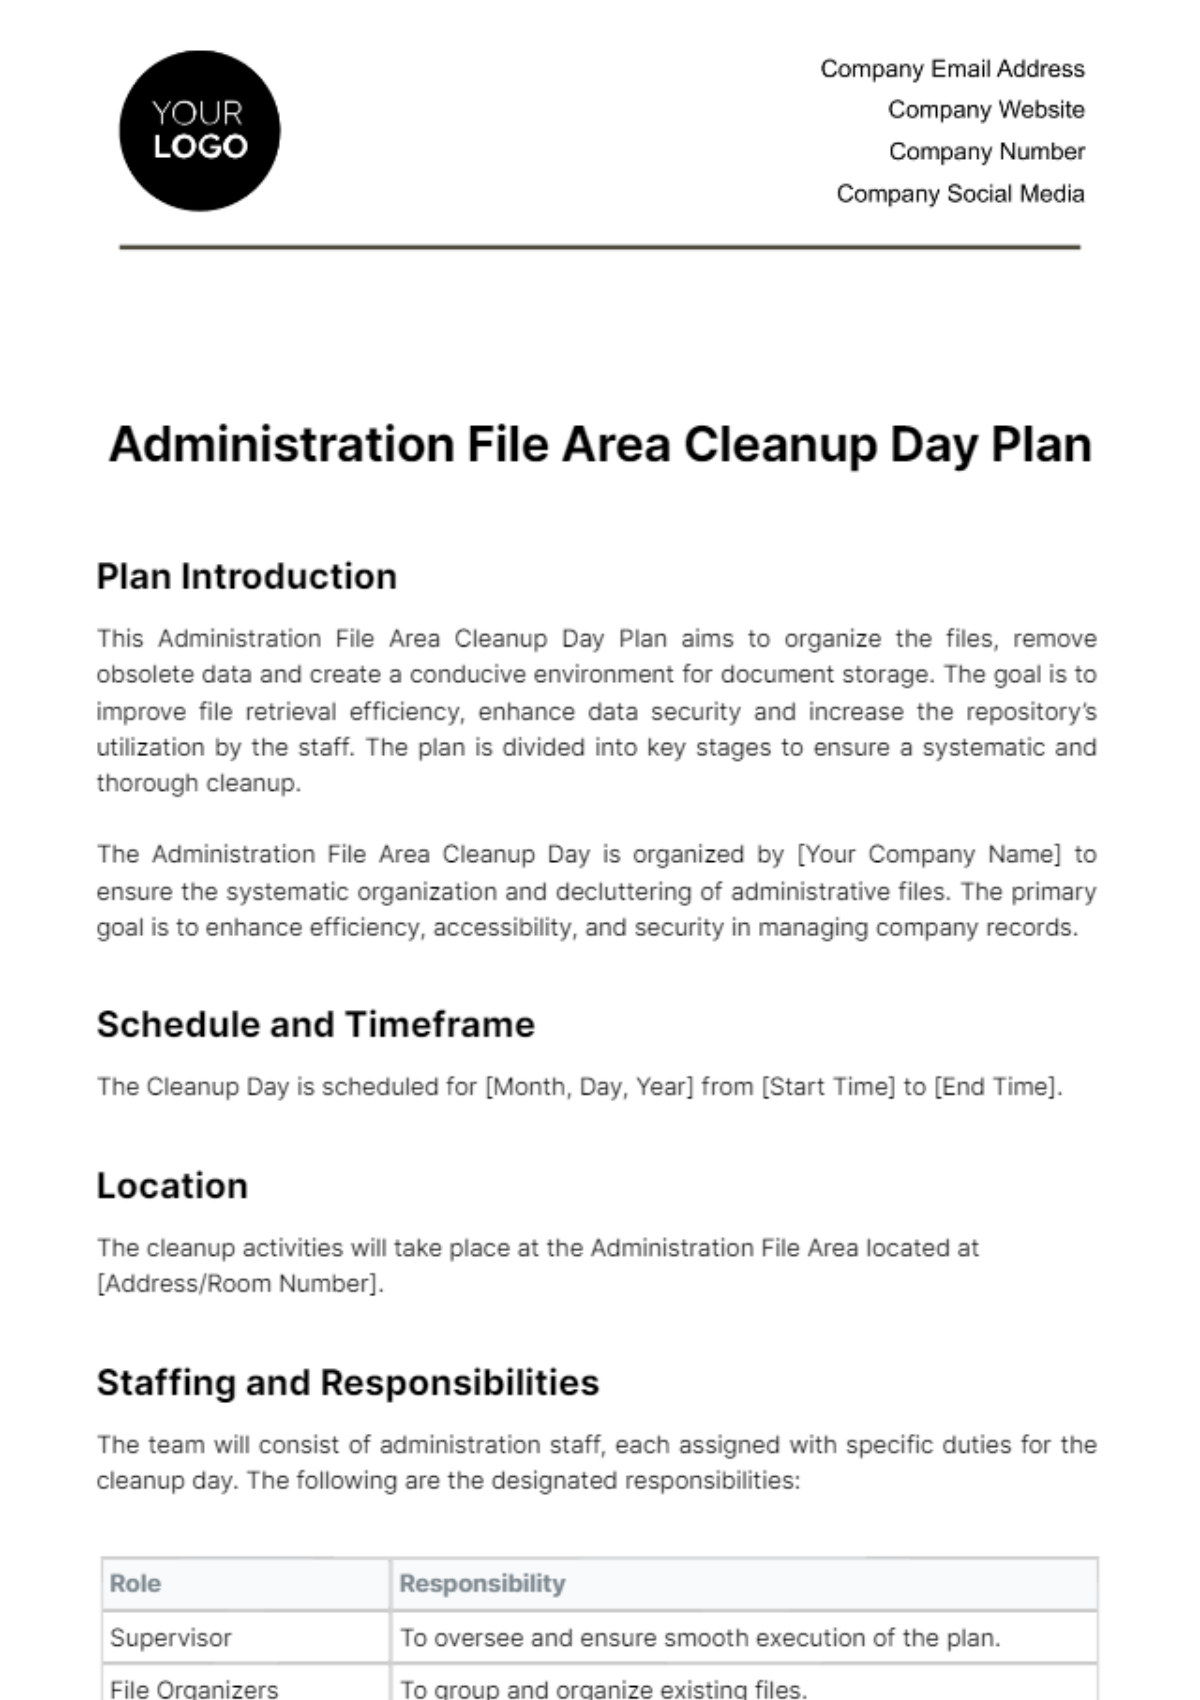 Administration File Area Cleanup Day Plan Template